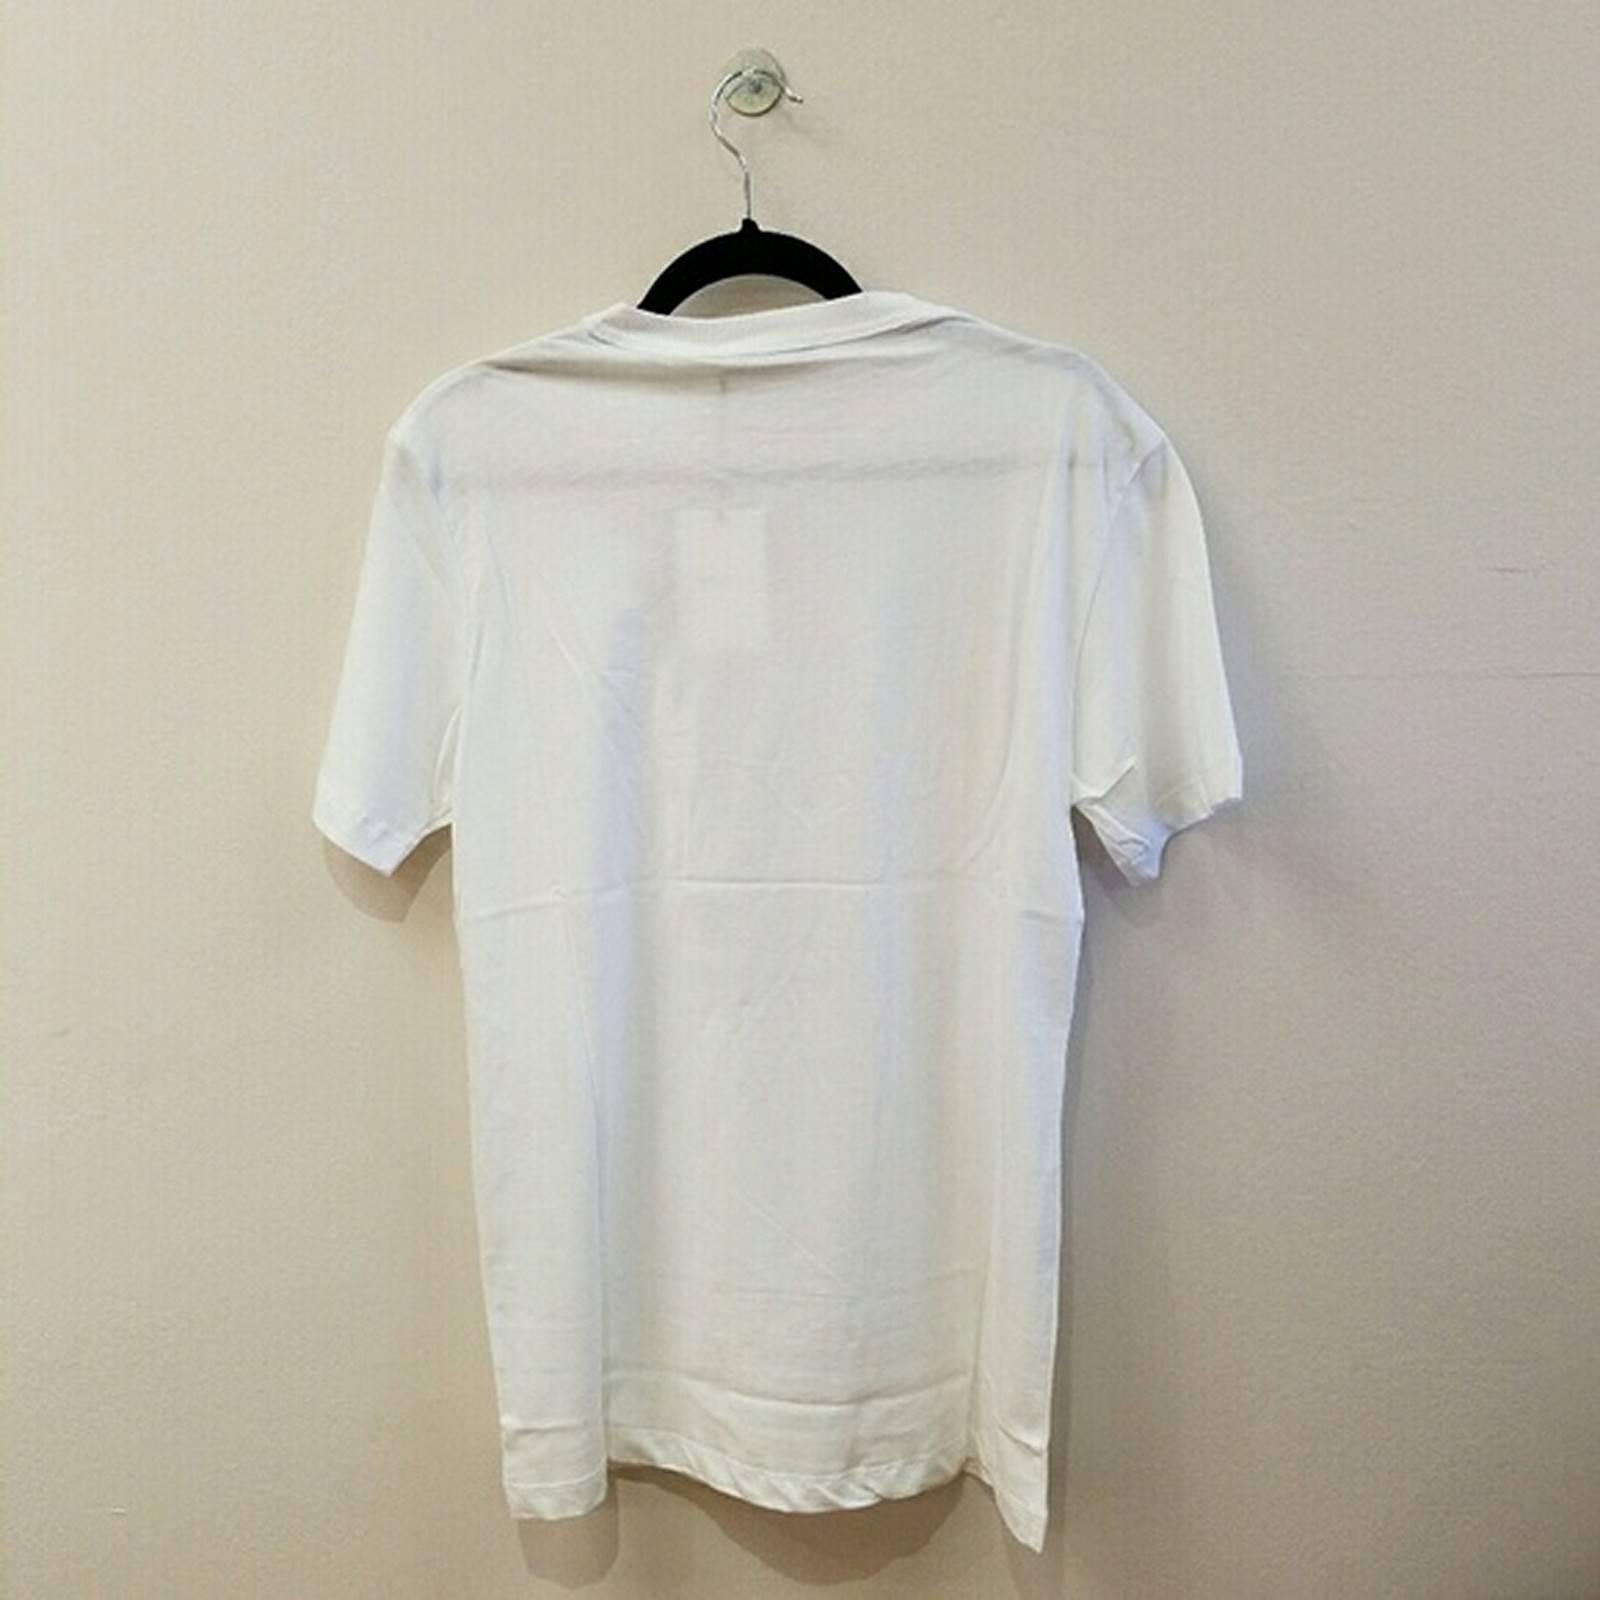 Pierre Balmain Cotton T-shirt White (Large)

Brand new with tags. Made in Italy.
